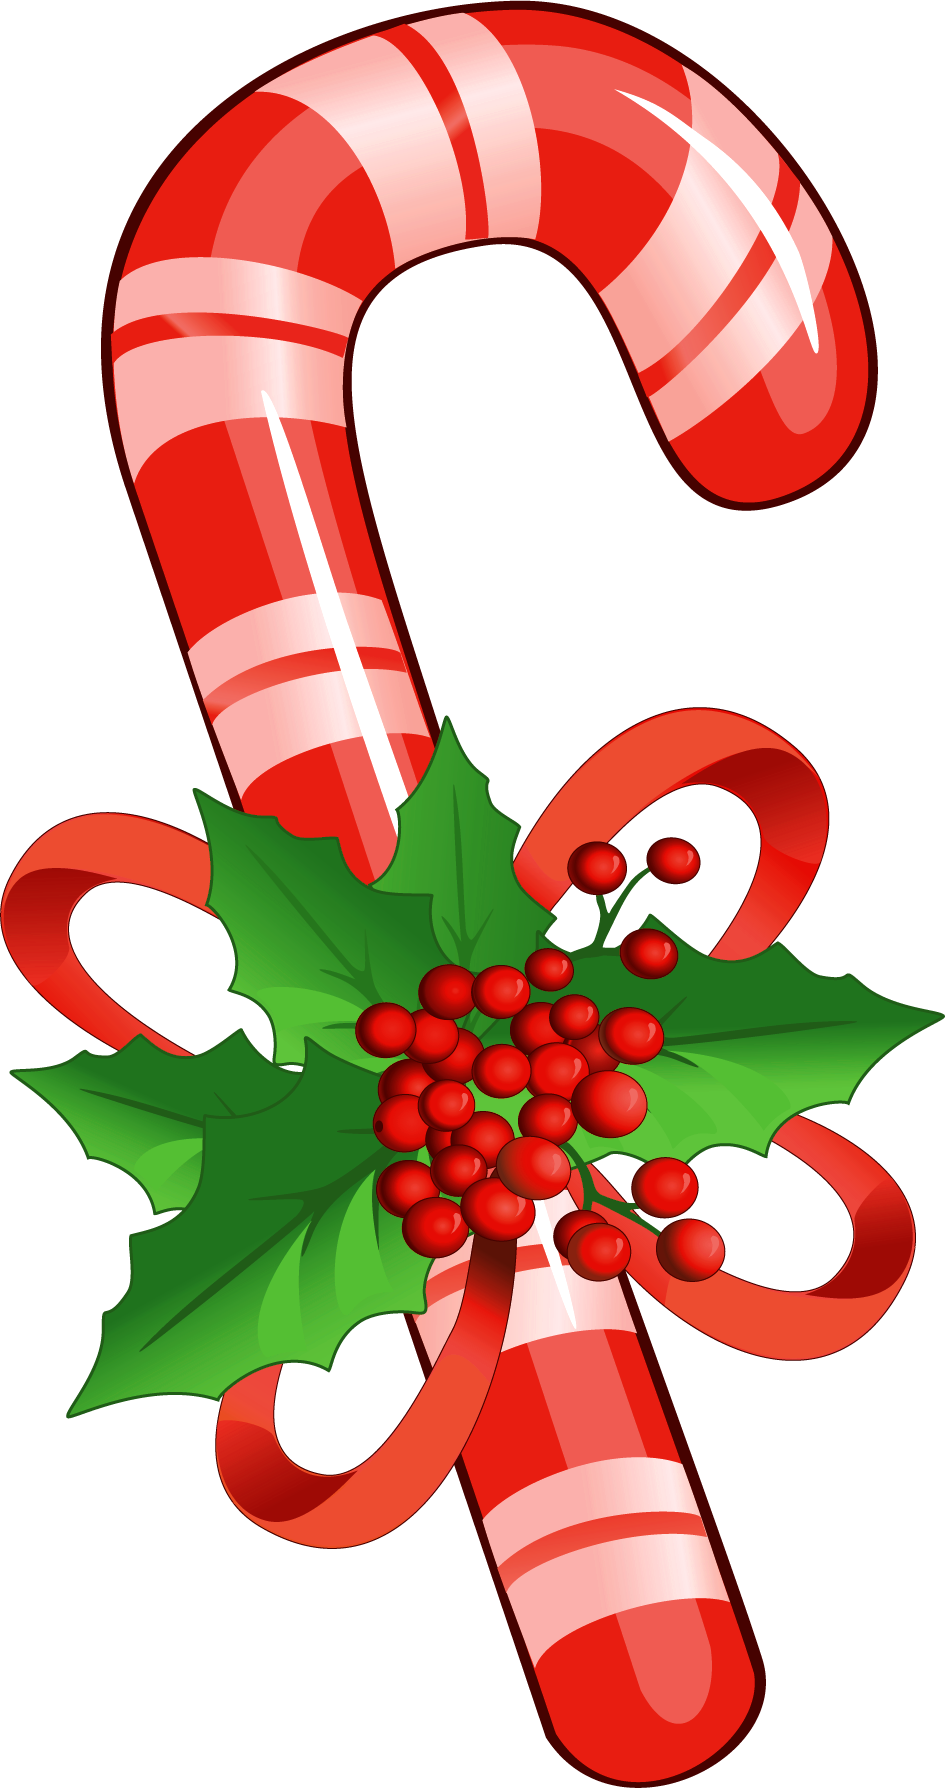 Candy cane clipart - Clipart Candy Cane